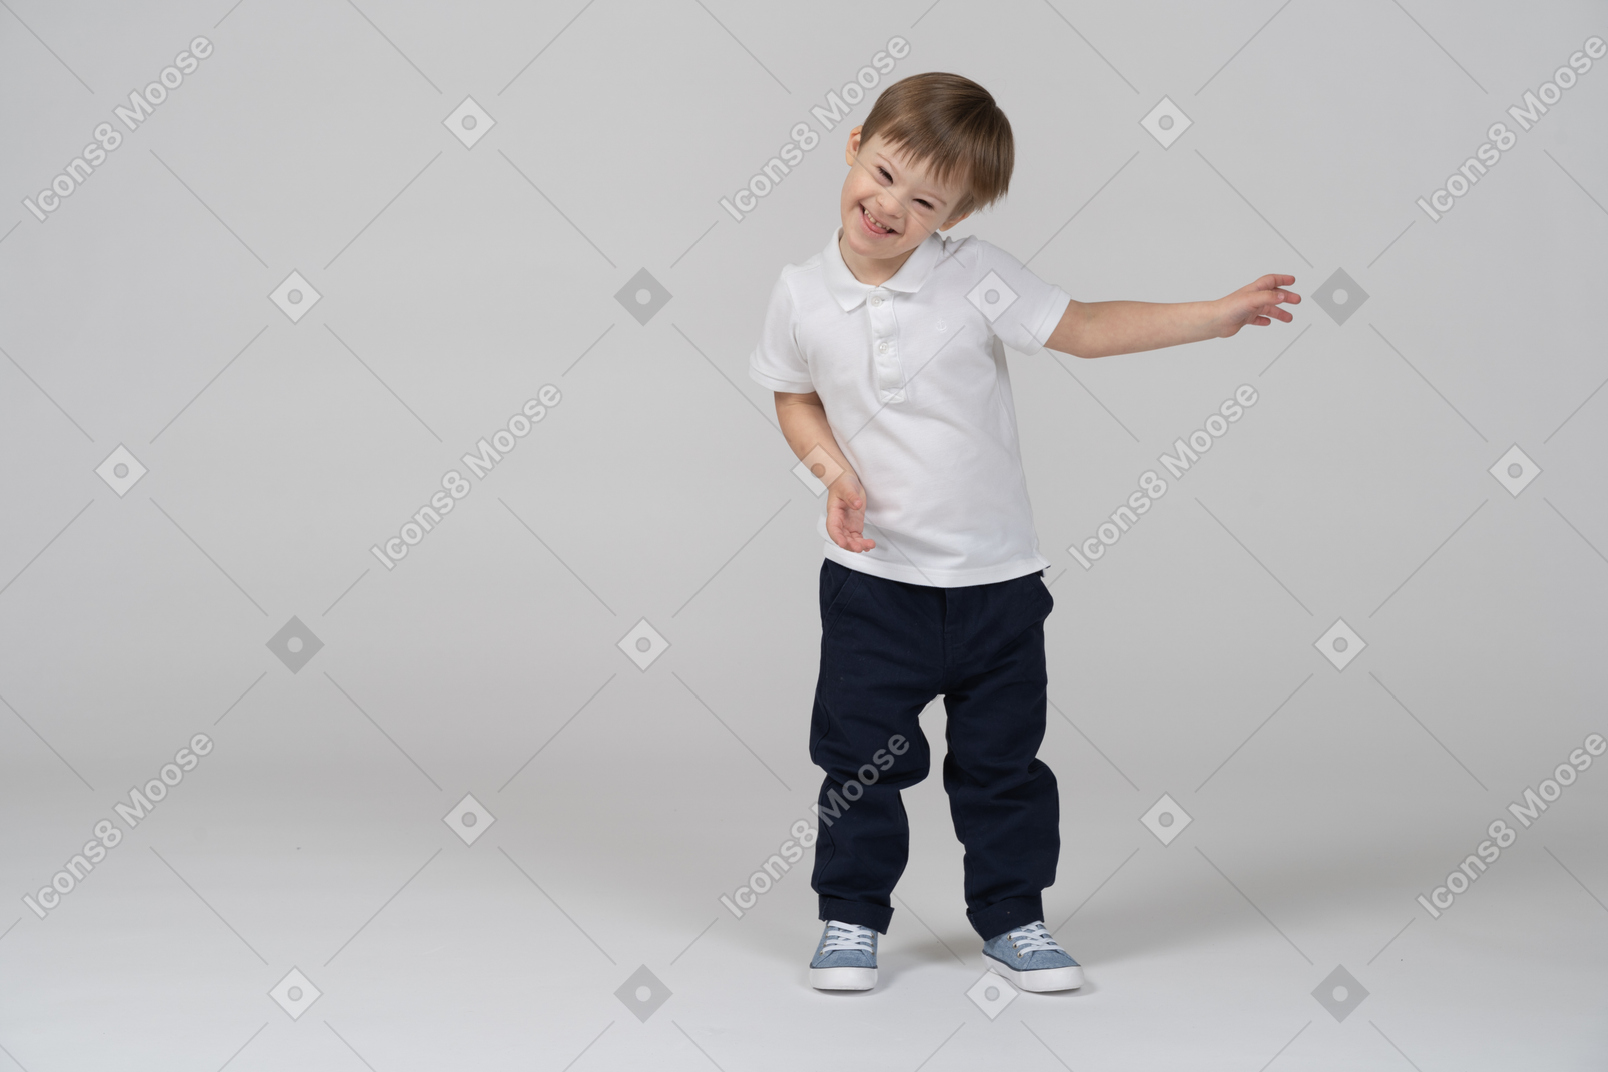 Front view of a boy waving hands and laughing